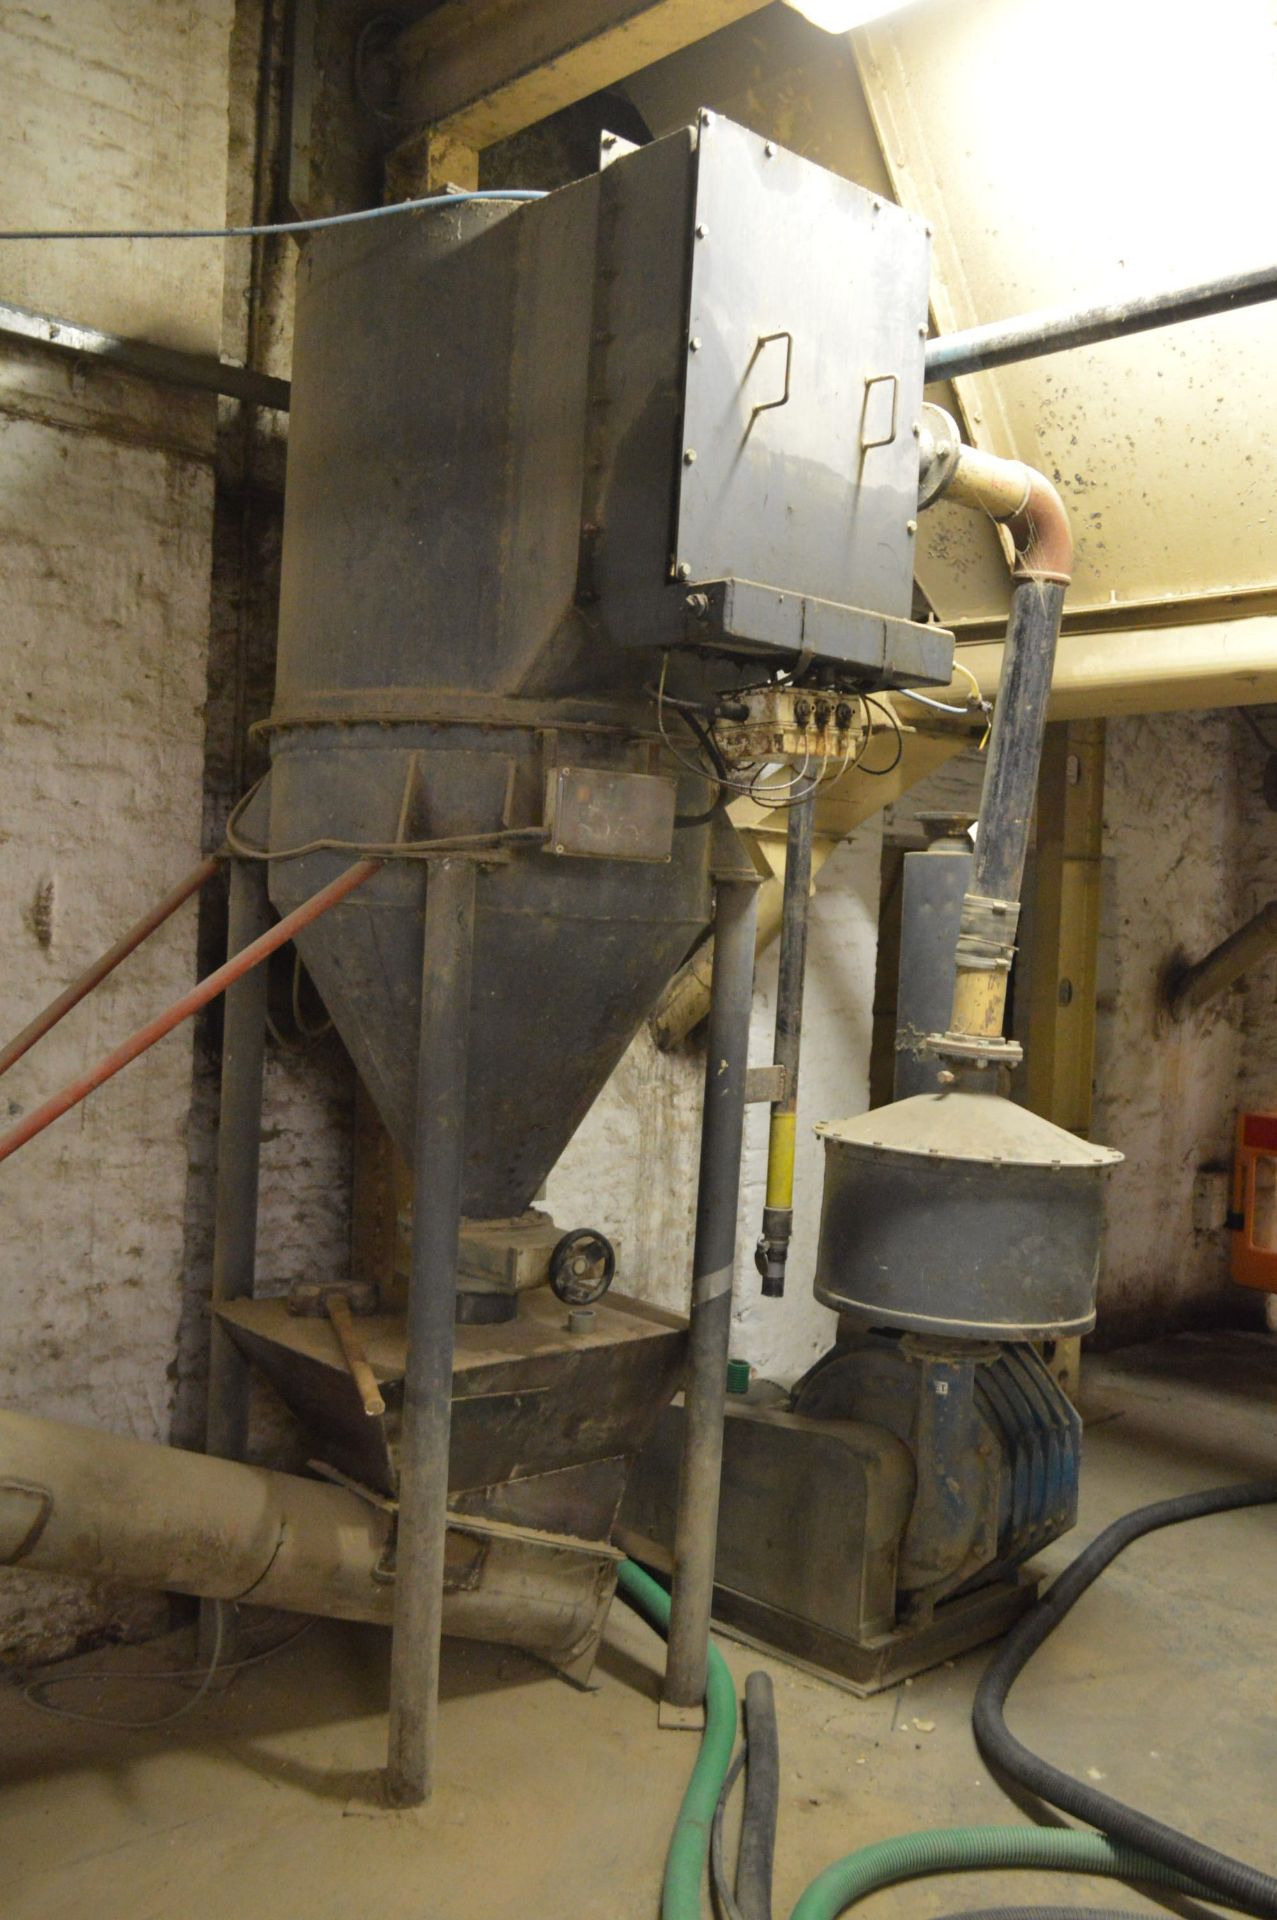 MILL CENTRAL VACUUM SYSTEM, with vacuum, filted11kW electric motor, receiver unit fitted filter, - Bild 2 aus 4